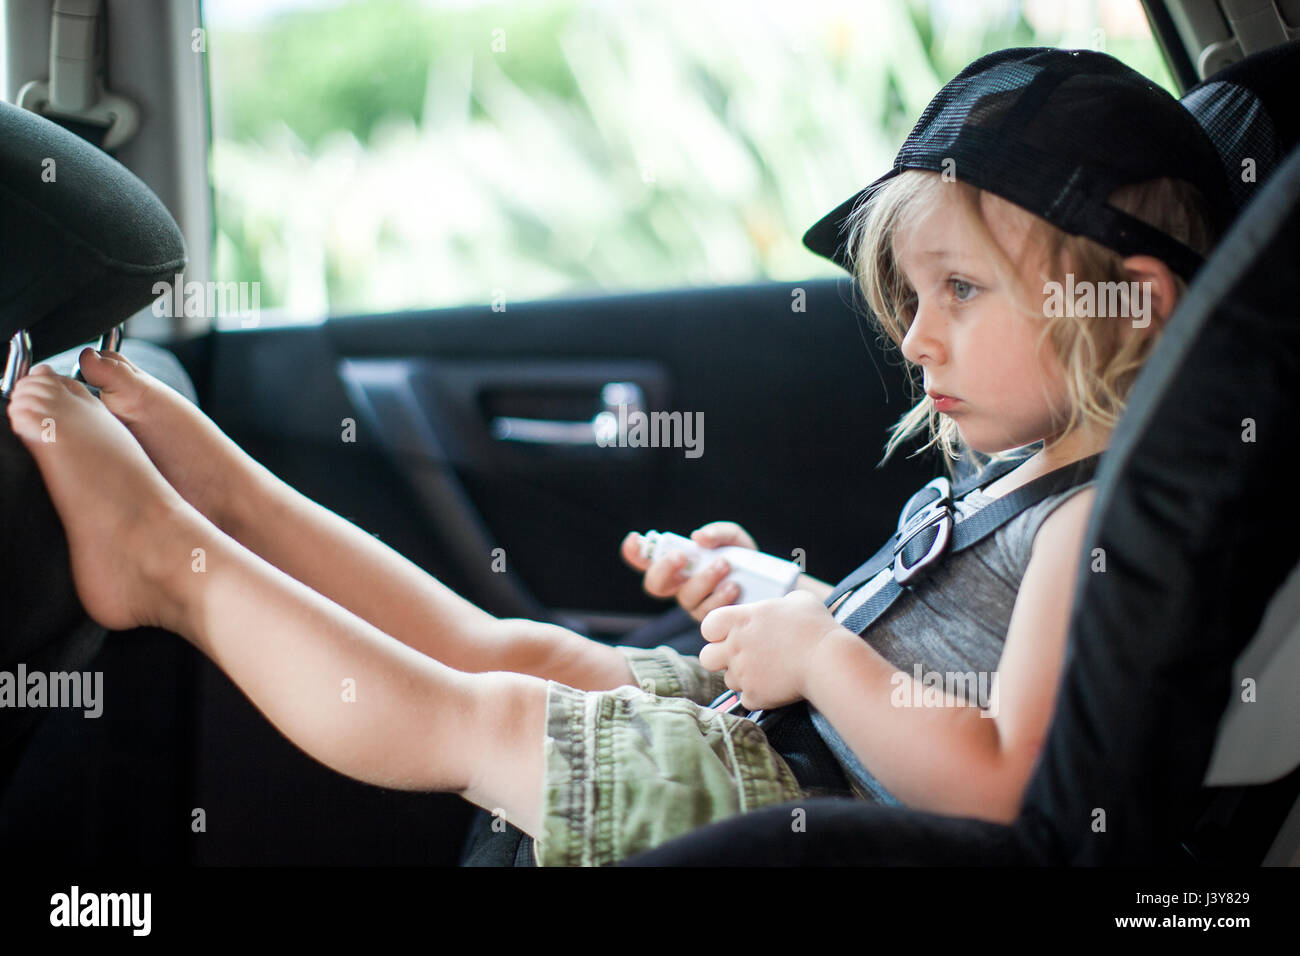 Young boy sitting in child's seat in back seat of car, bored expression Stock Photo